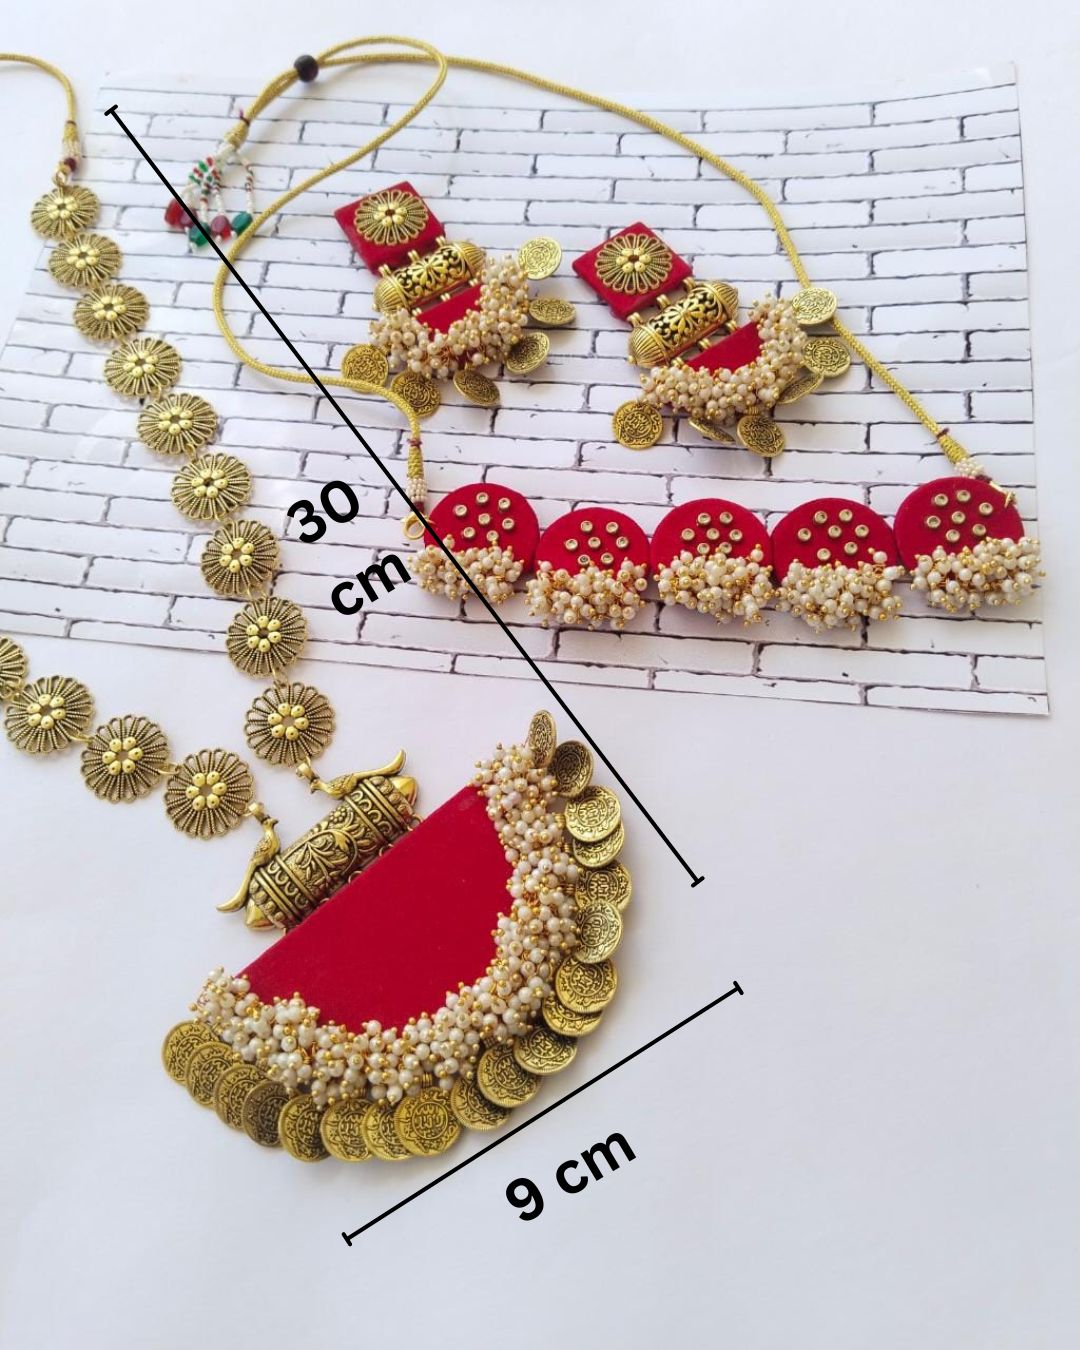 Rainvas Red necklace choker earrings set with kundan and golden pearls beads